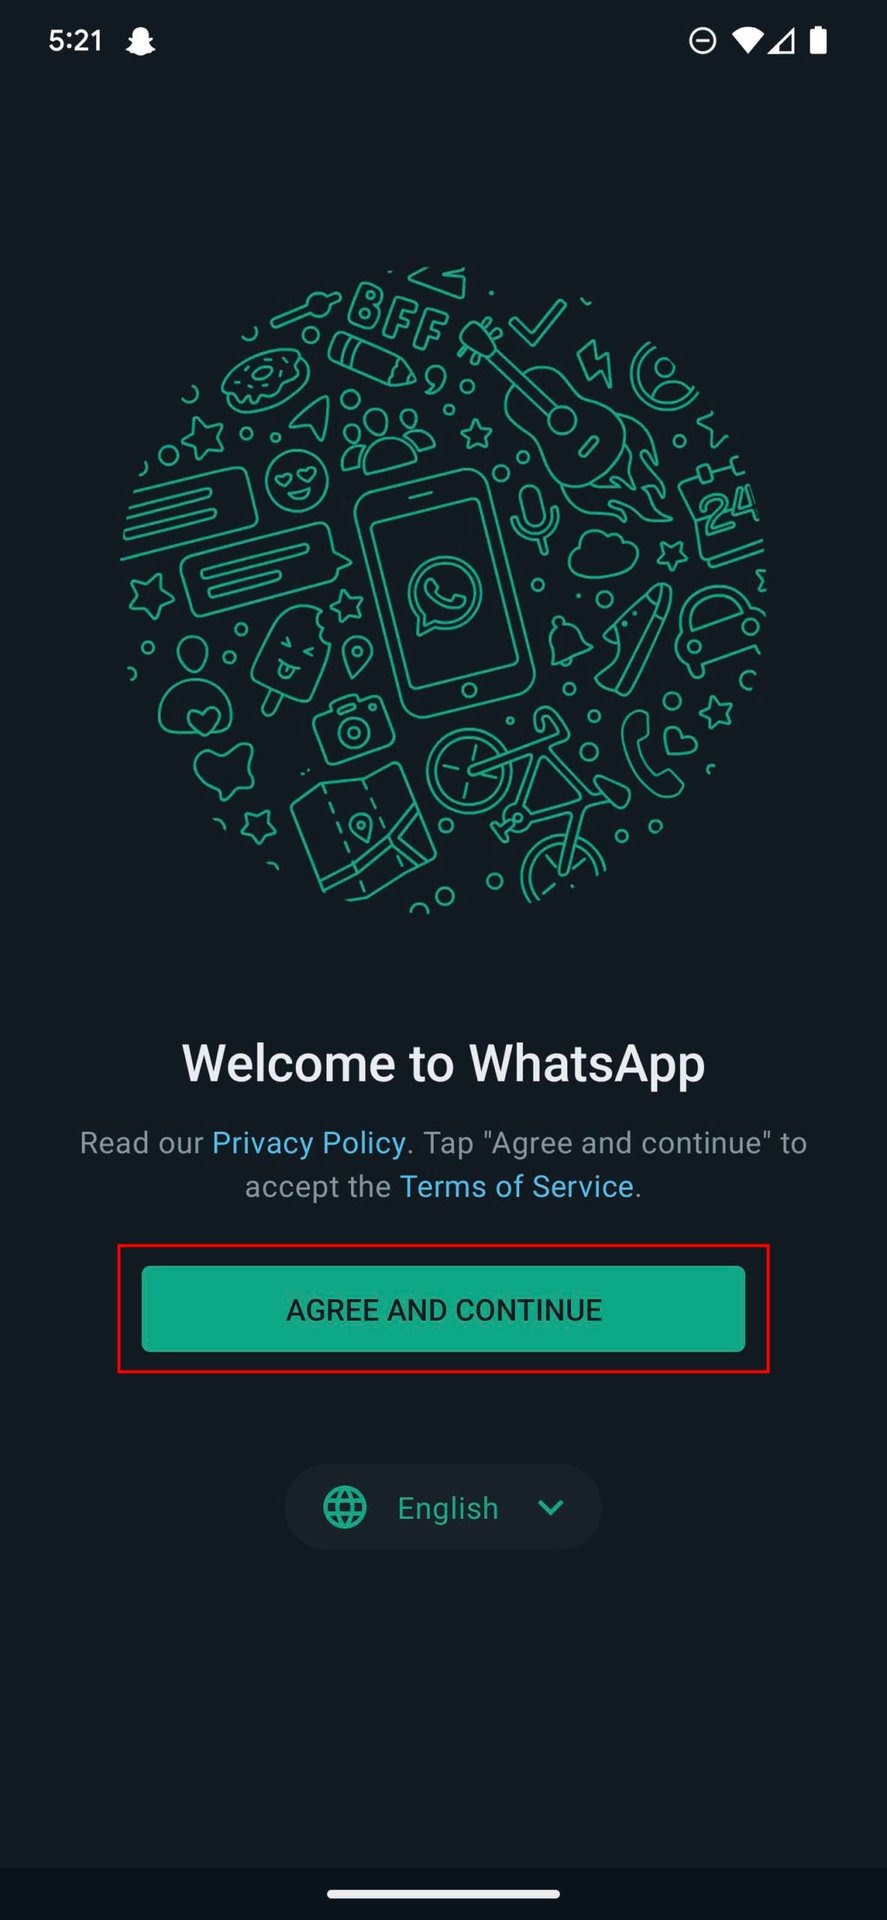 How to use WhatsApp without a SIM using a second cellphone 2